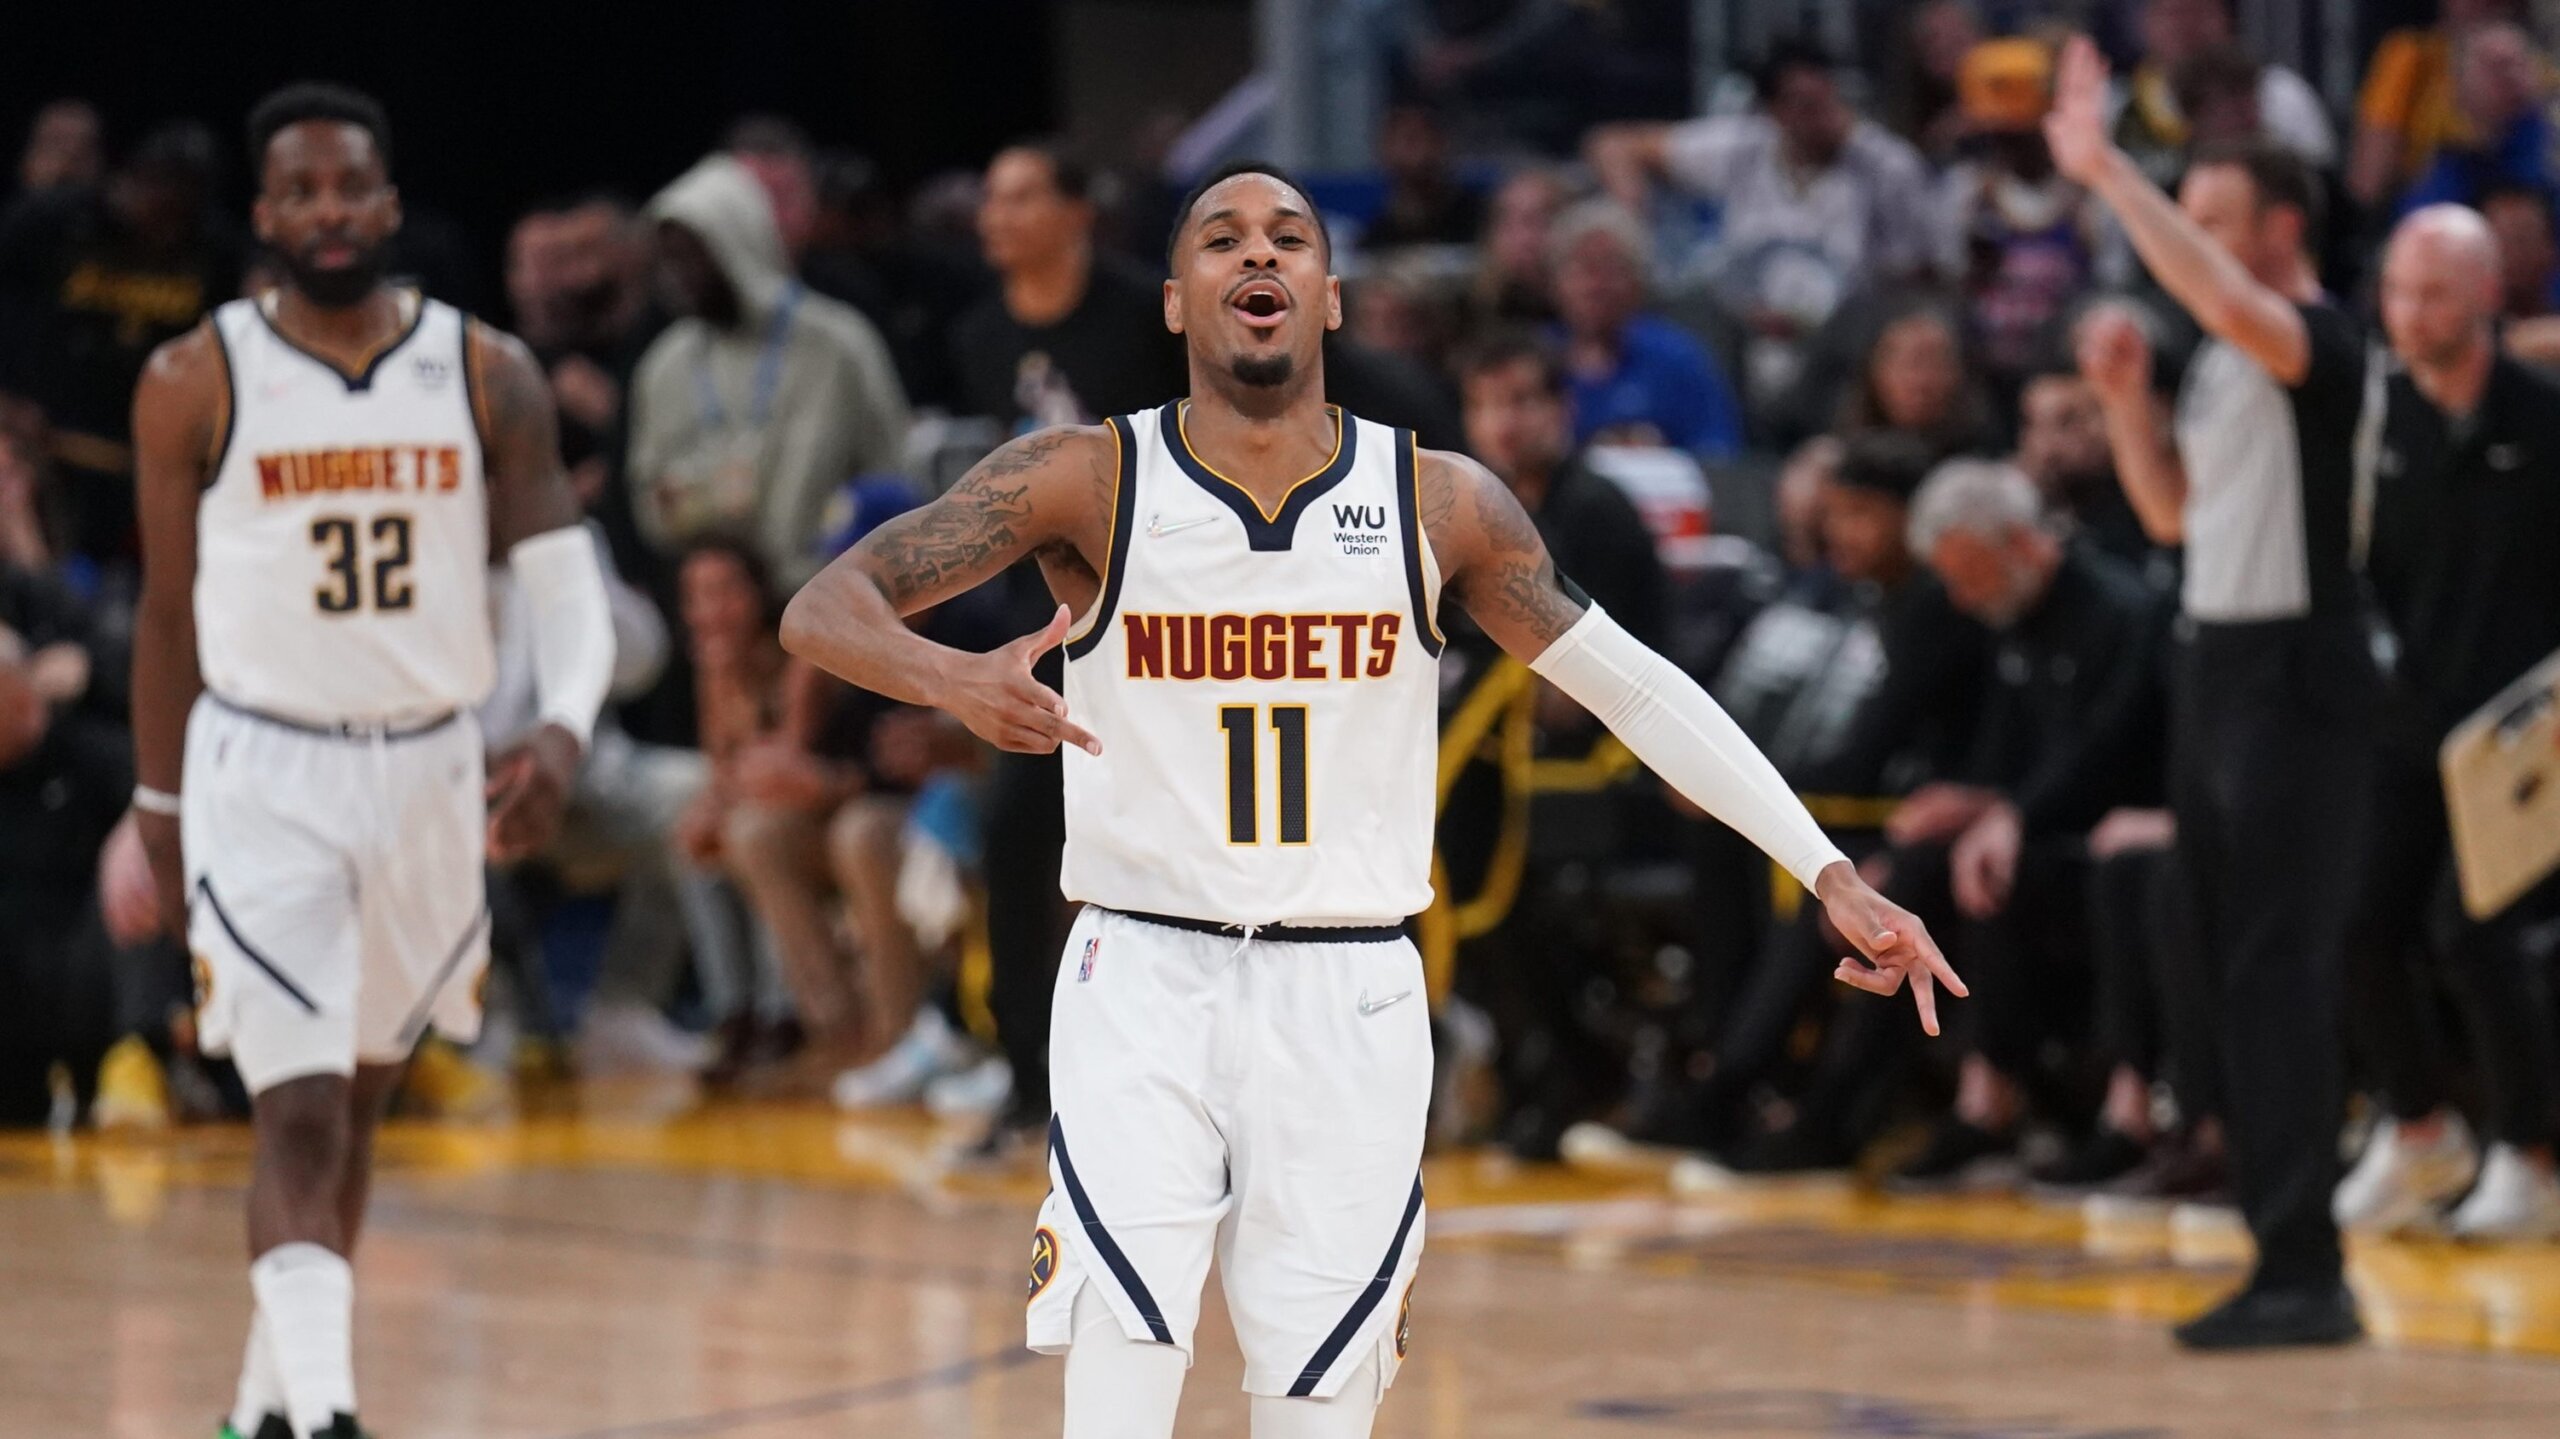 The Nuggets are trading Monte Morris and Will Barton to the